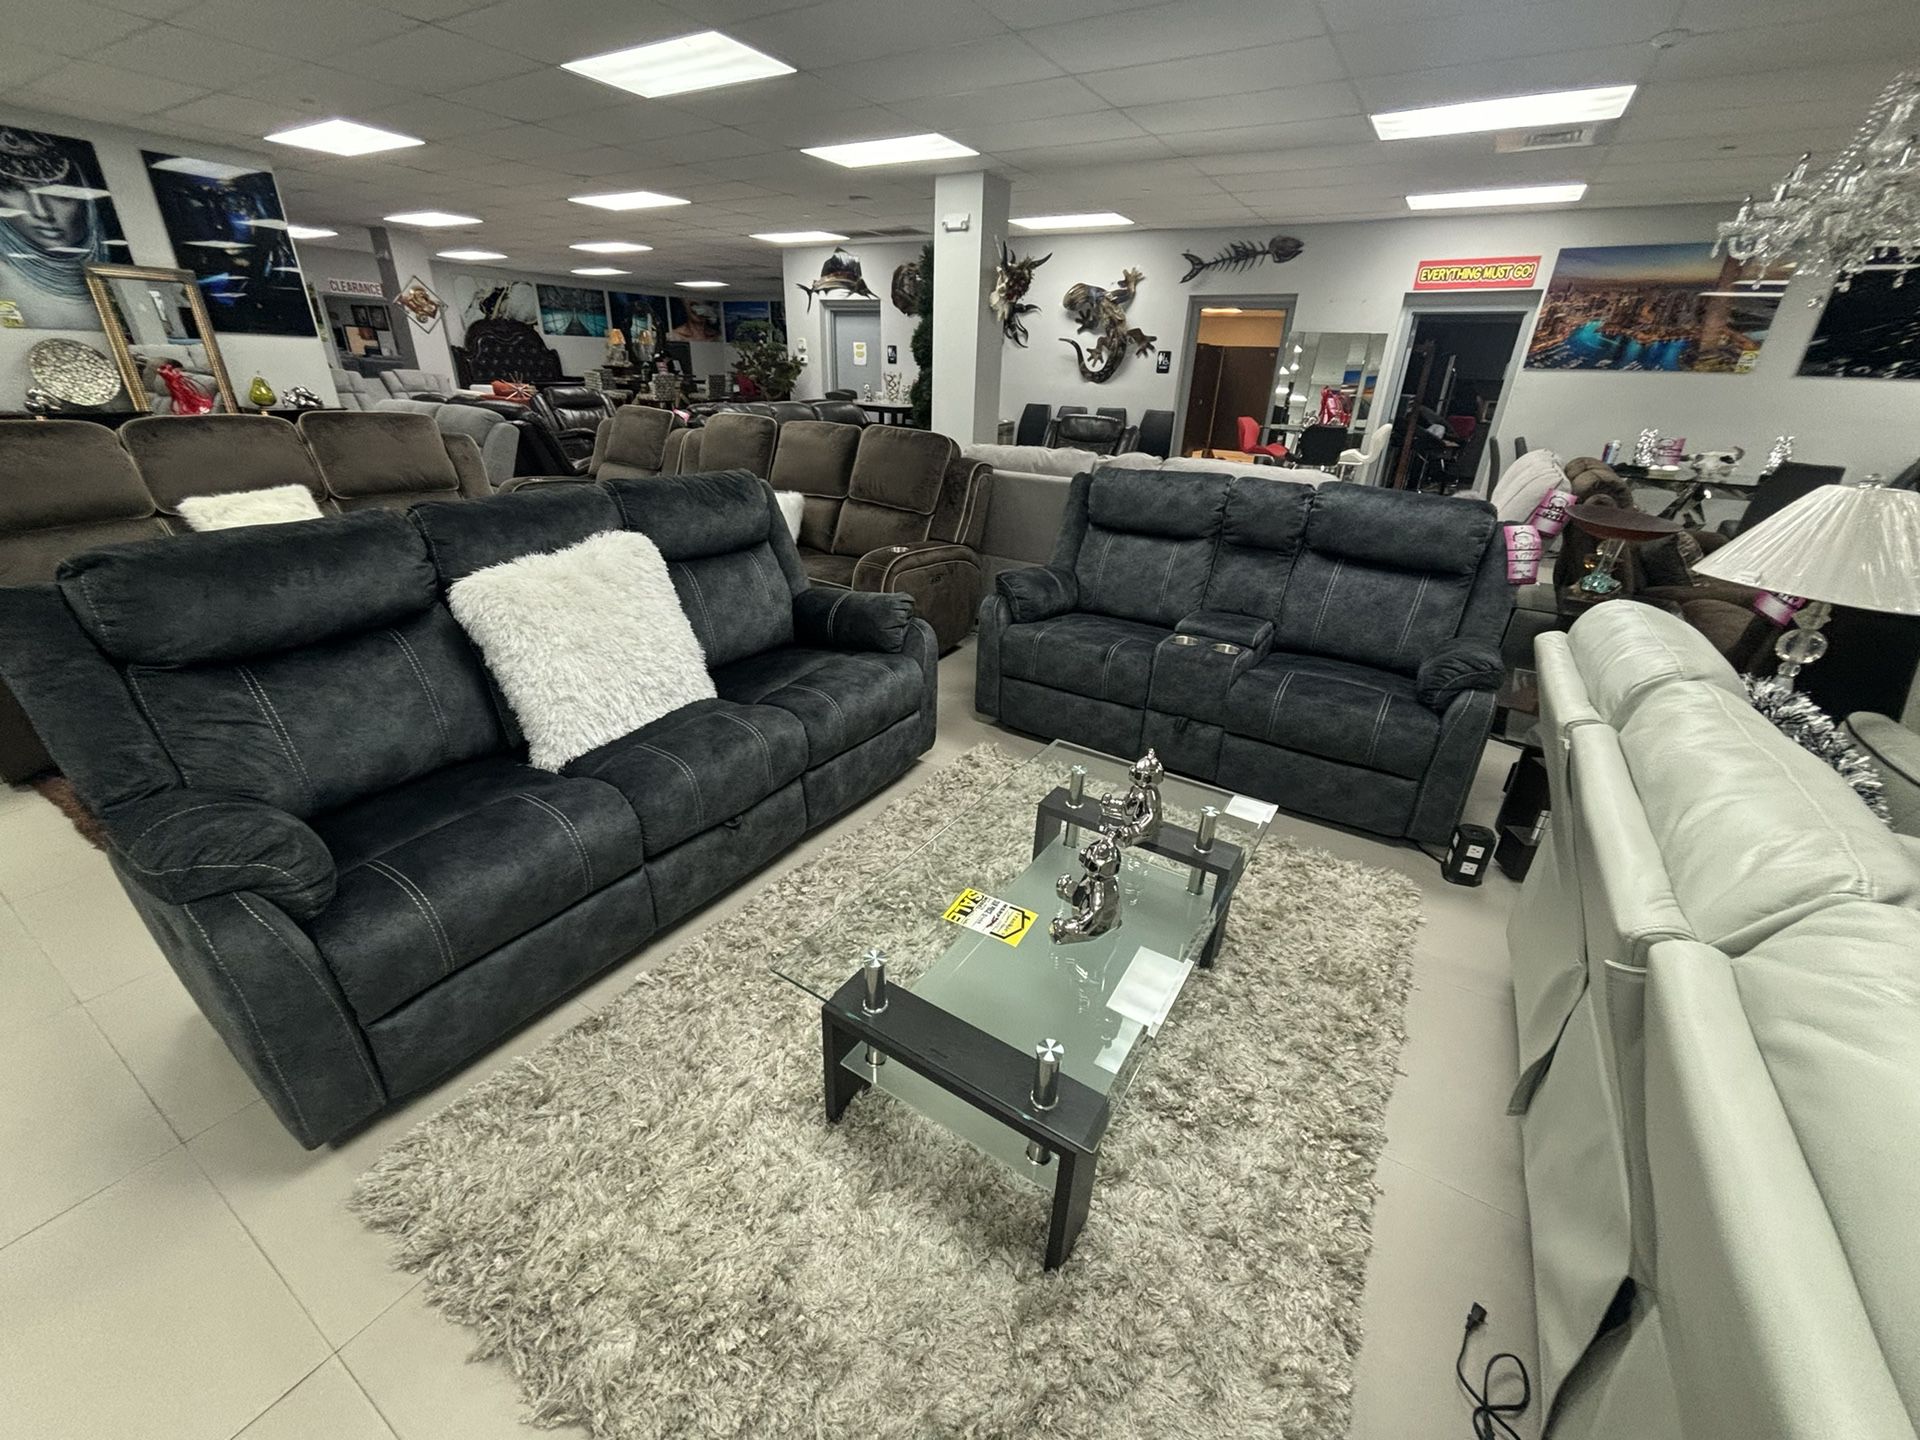 Micro Fiber Reclining Sofá And Love Living Room Set On Closing Clearance With Drop Console On Sale For $799 STORE CLOSING 